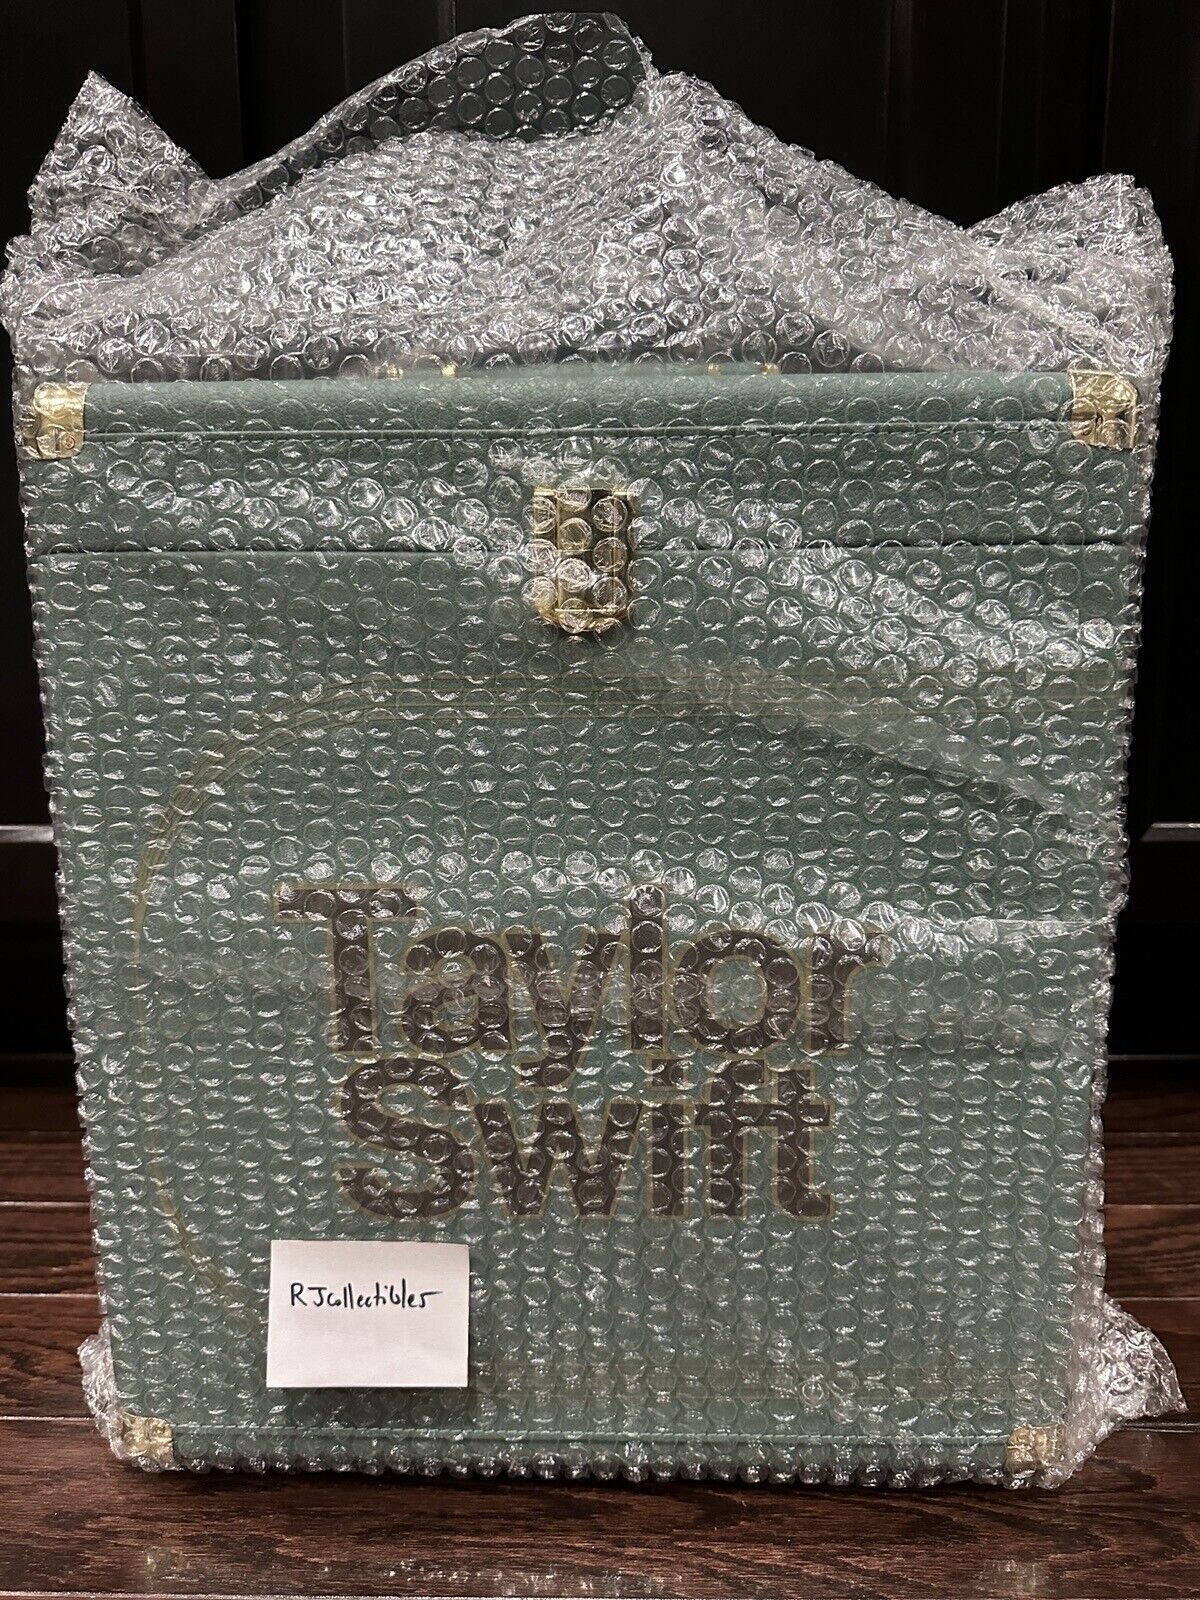 NEW TAYLOR SWIFT MIDNIGHTS VINYL COLLECTOR'S CASE BLUE LIMITED EDITION